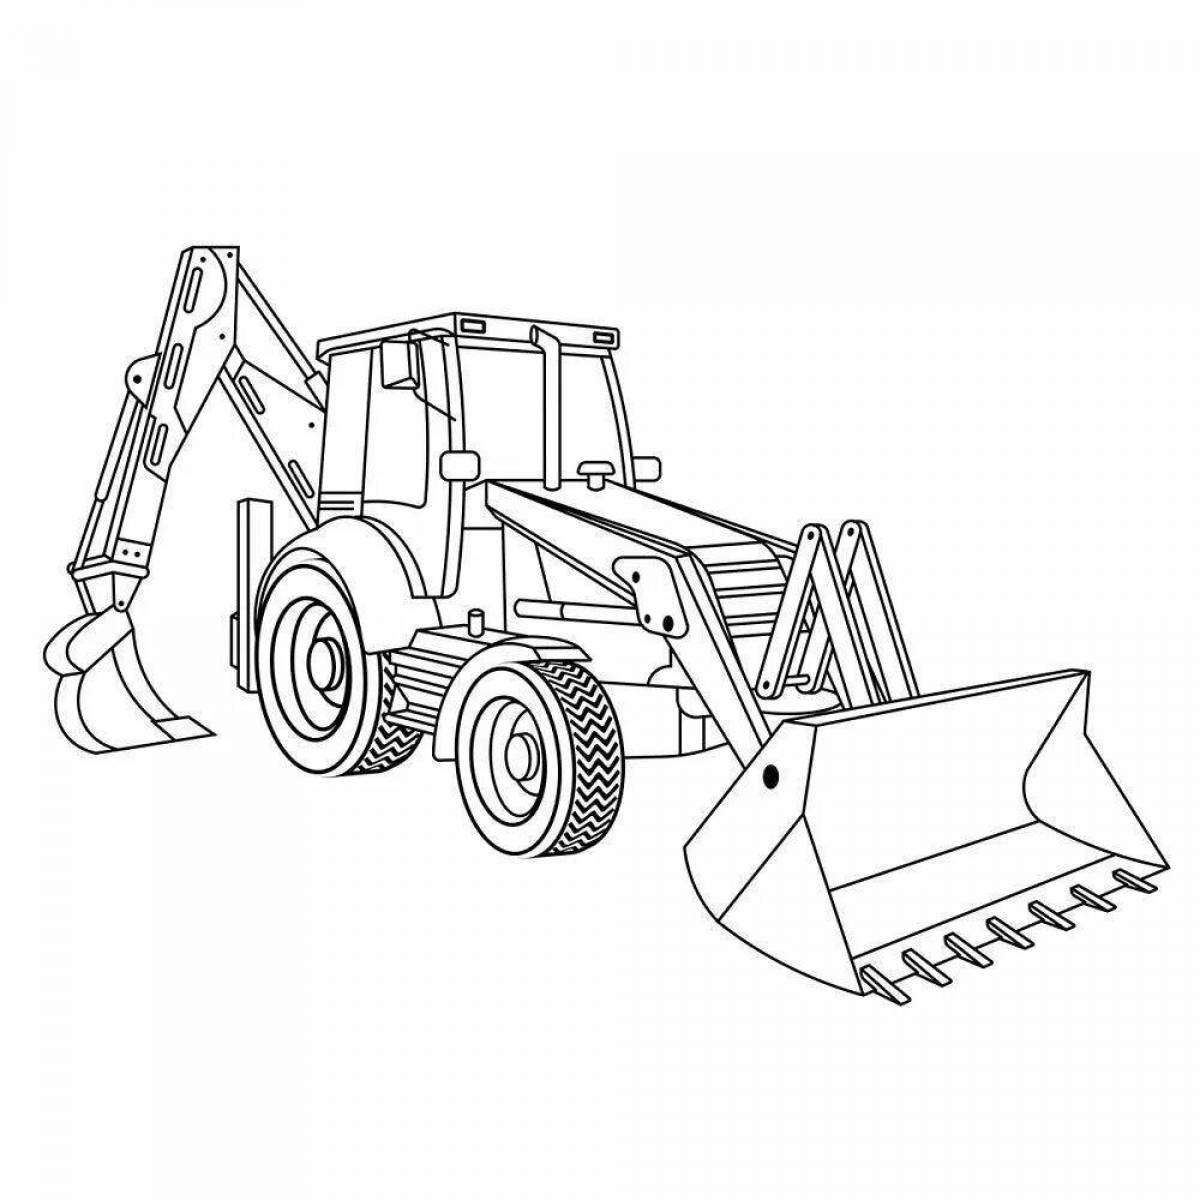 Coloring page for a fascinating bucket excavator